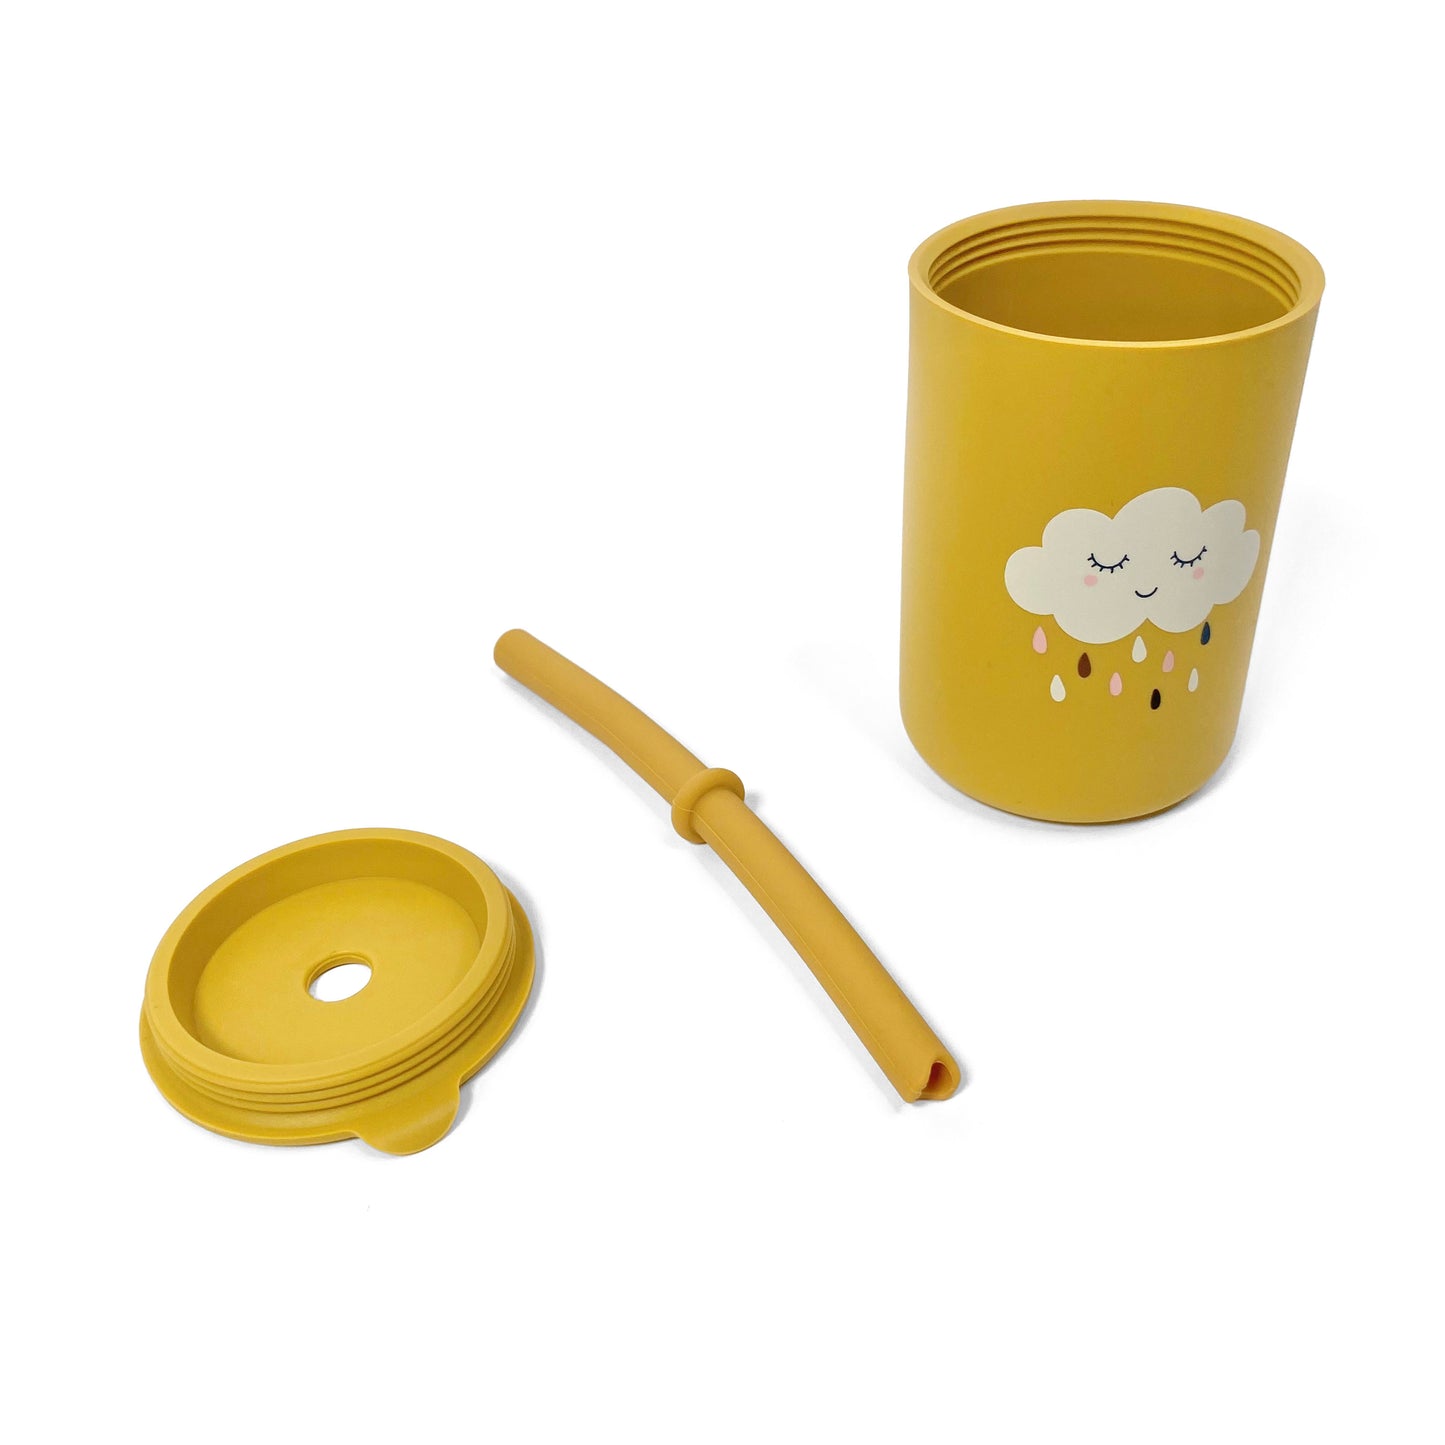 A children’s yellow silicone drinking cup, with matching lid and straw, featuring a cloud design. The image shows the cup, lid and straw separately.